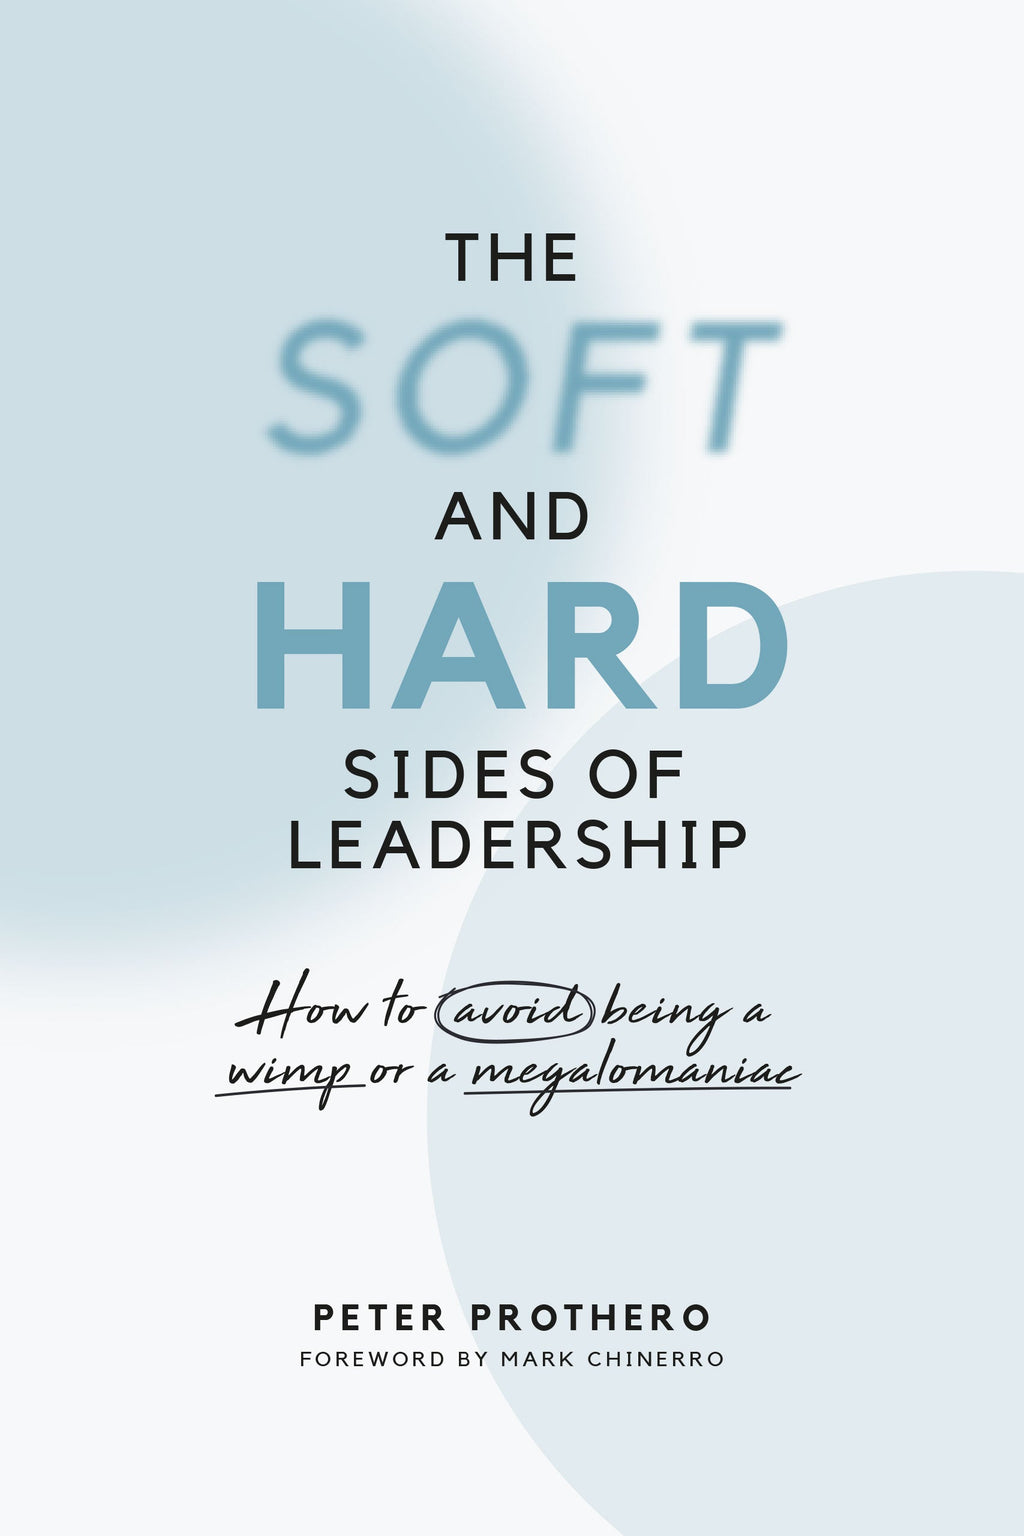 The Soft and Hard Sides of Leadership: How to Avoid Being a Wimp or Megalomaniac (AVAILABLE APRIL 8th)